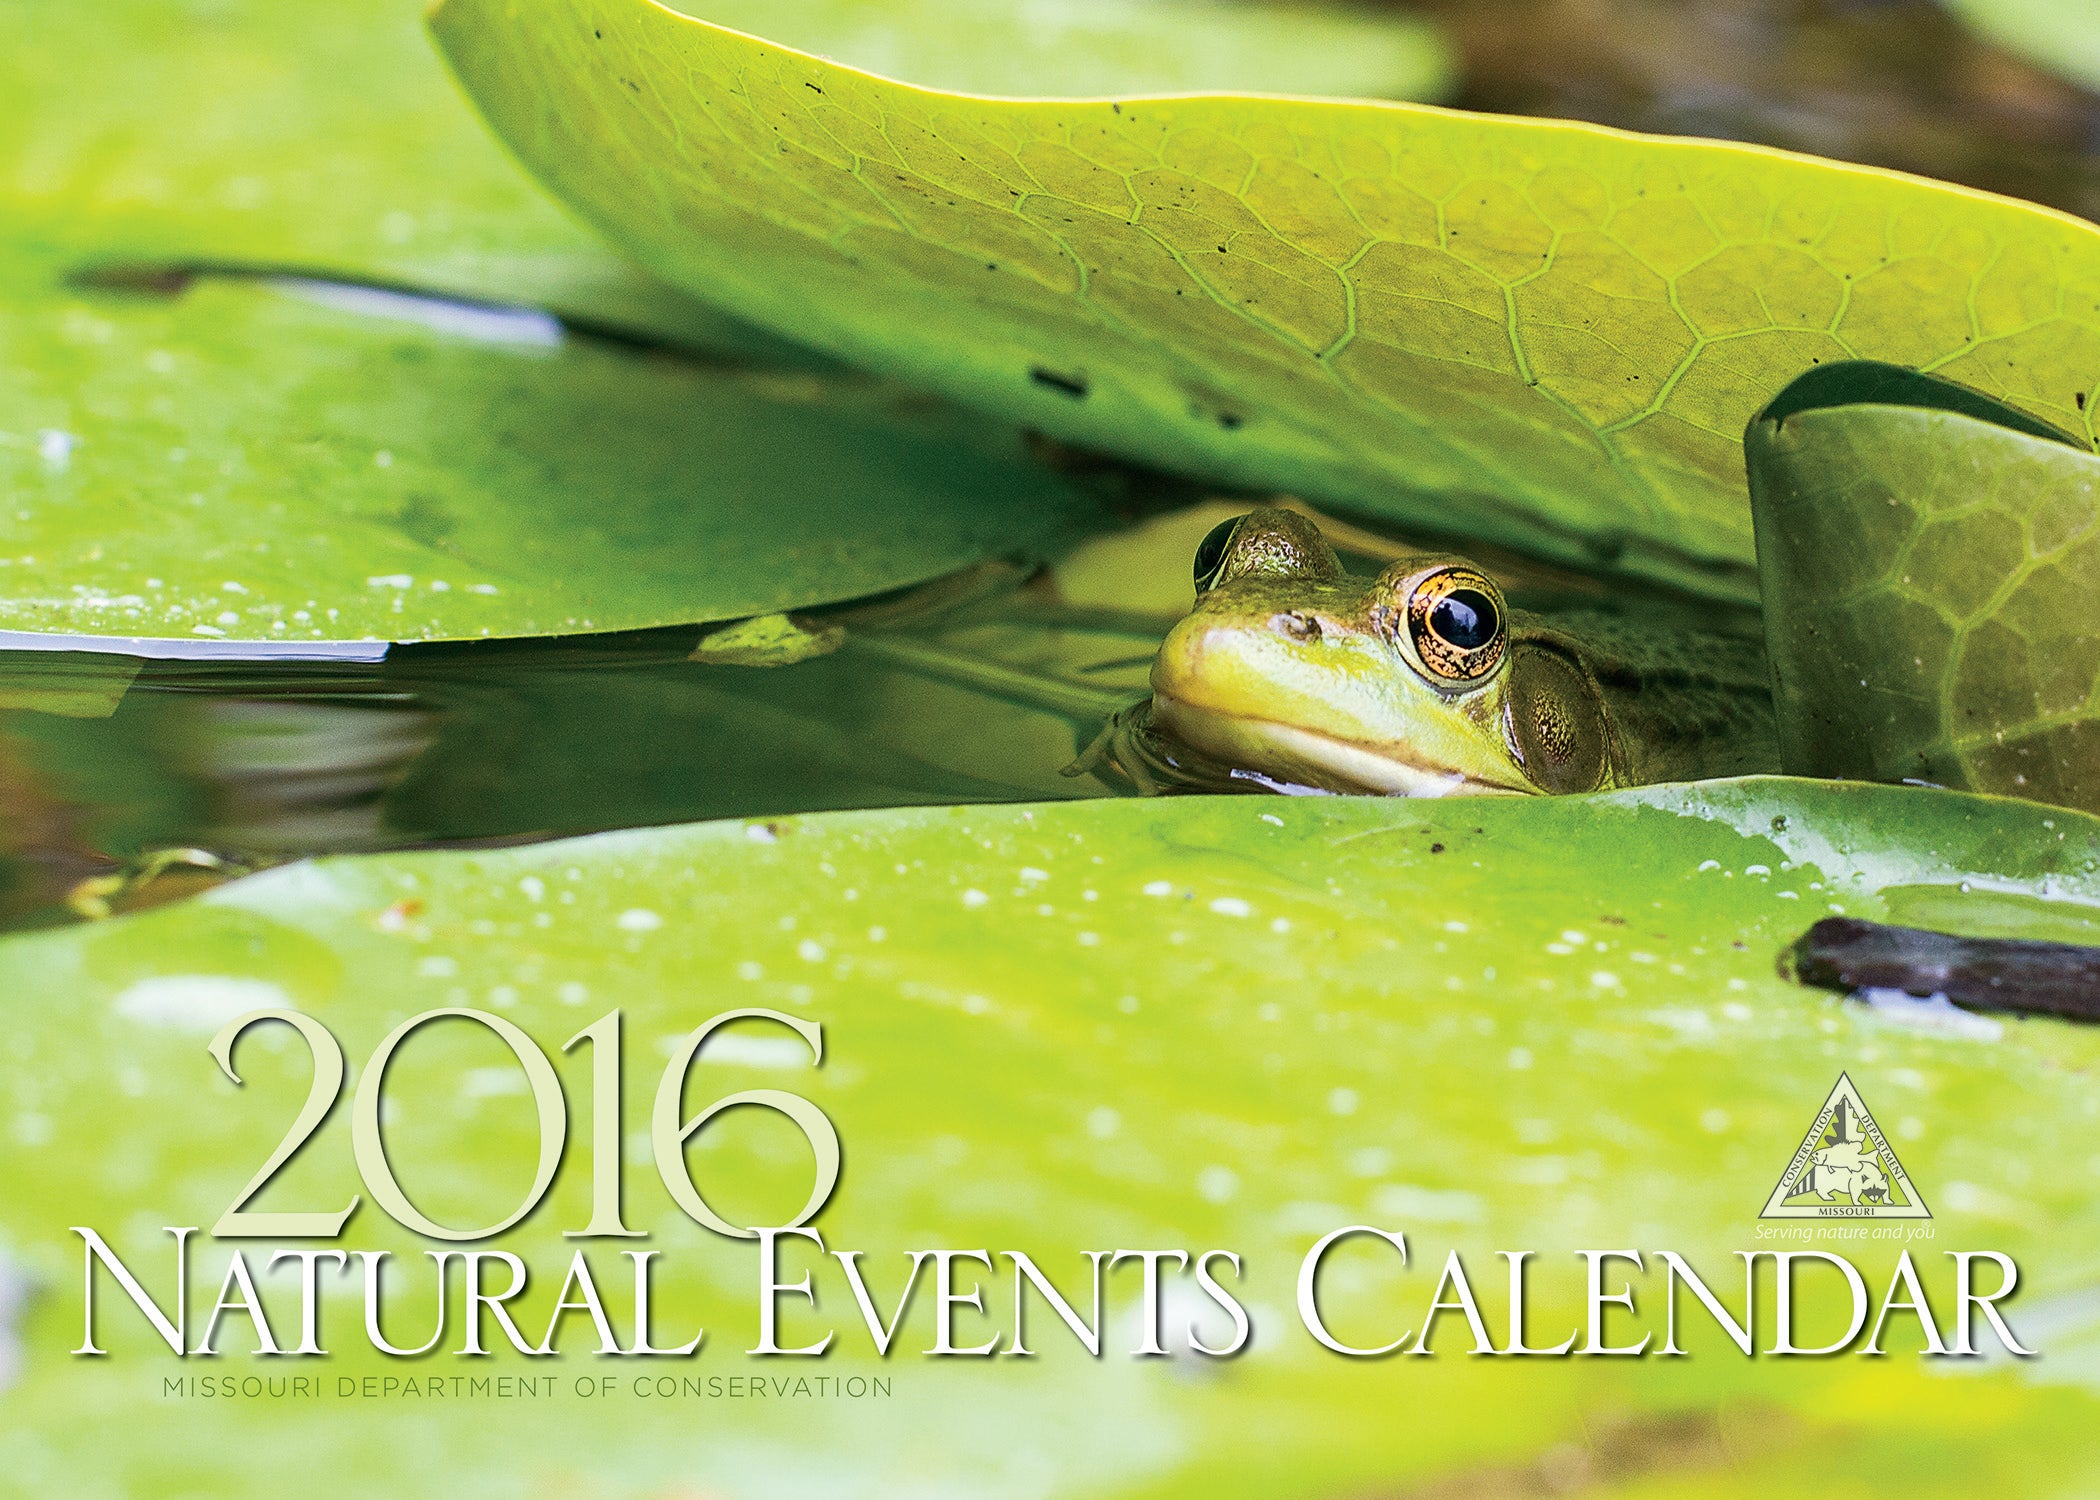 Discover nature with MDC Natural Events Calendar Missouri Department